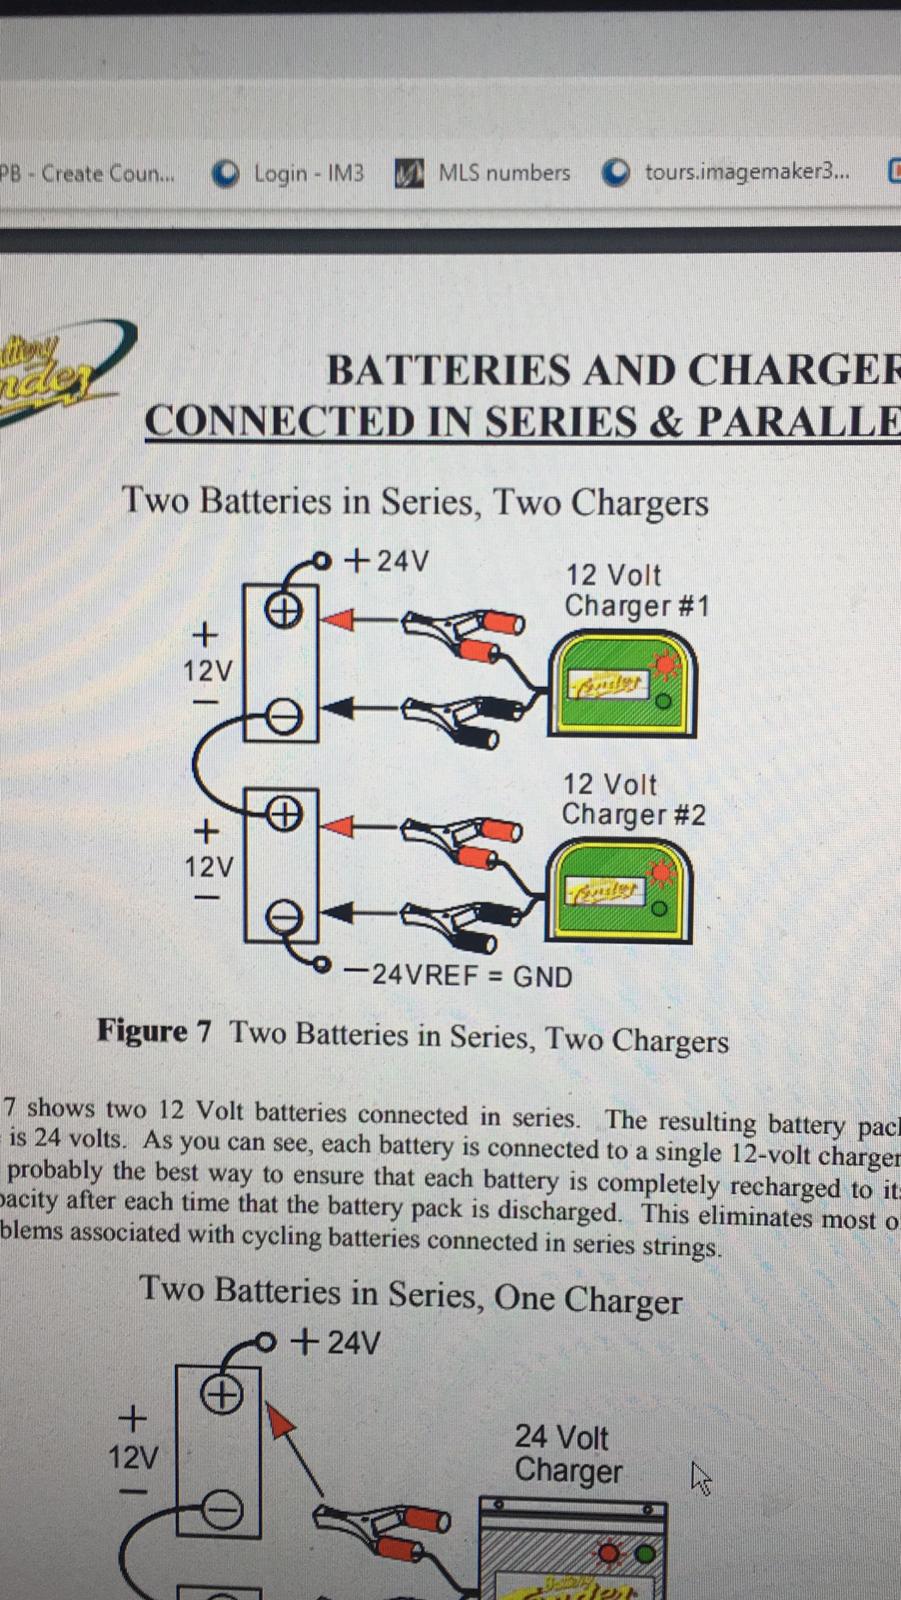 Charging 24V Bank With 12V Charger - Cruisers & Sailing Forums